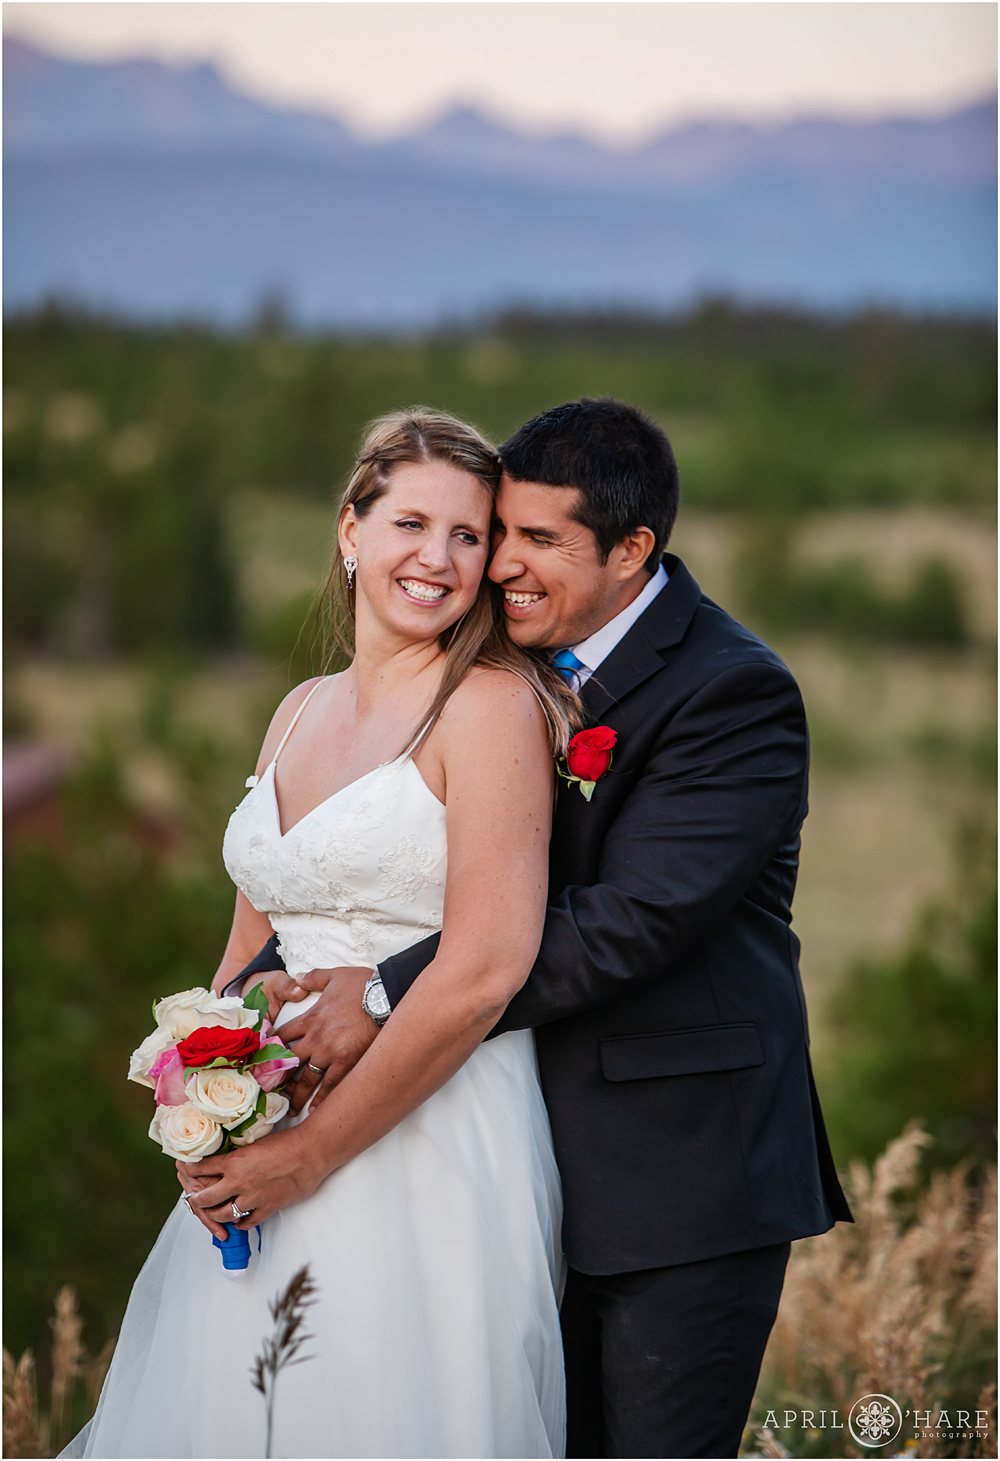 Sweet moment of bride and groom laughing together in Granby Colorado